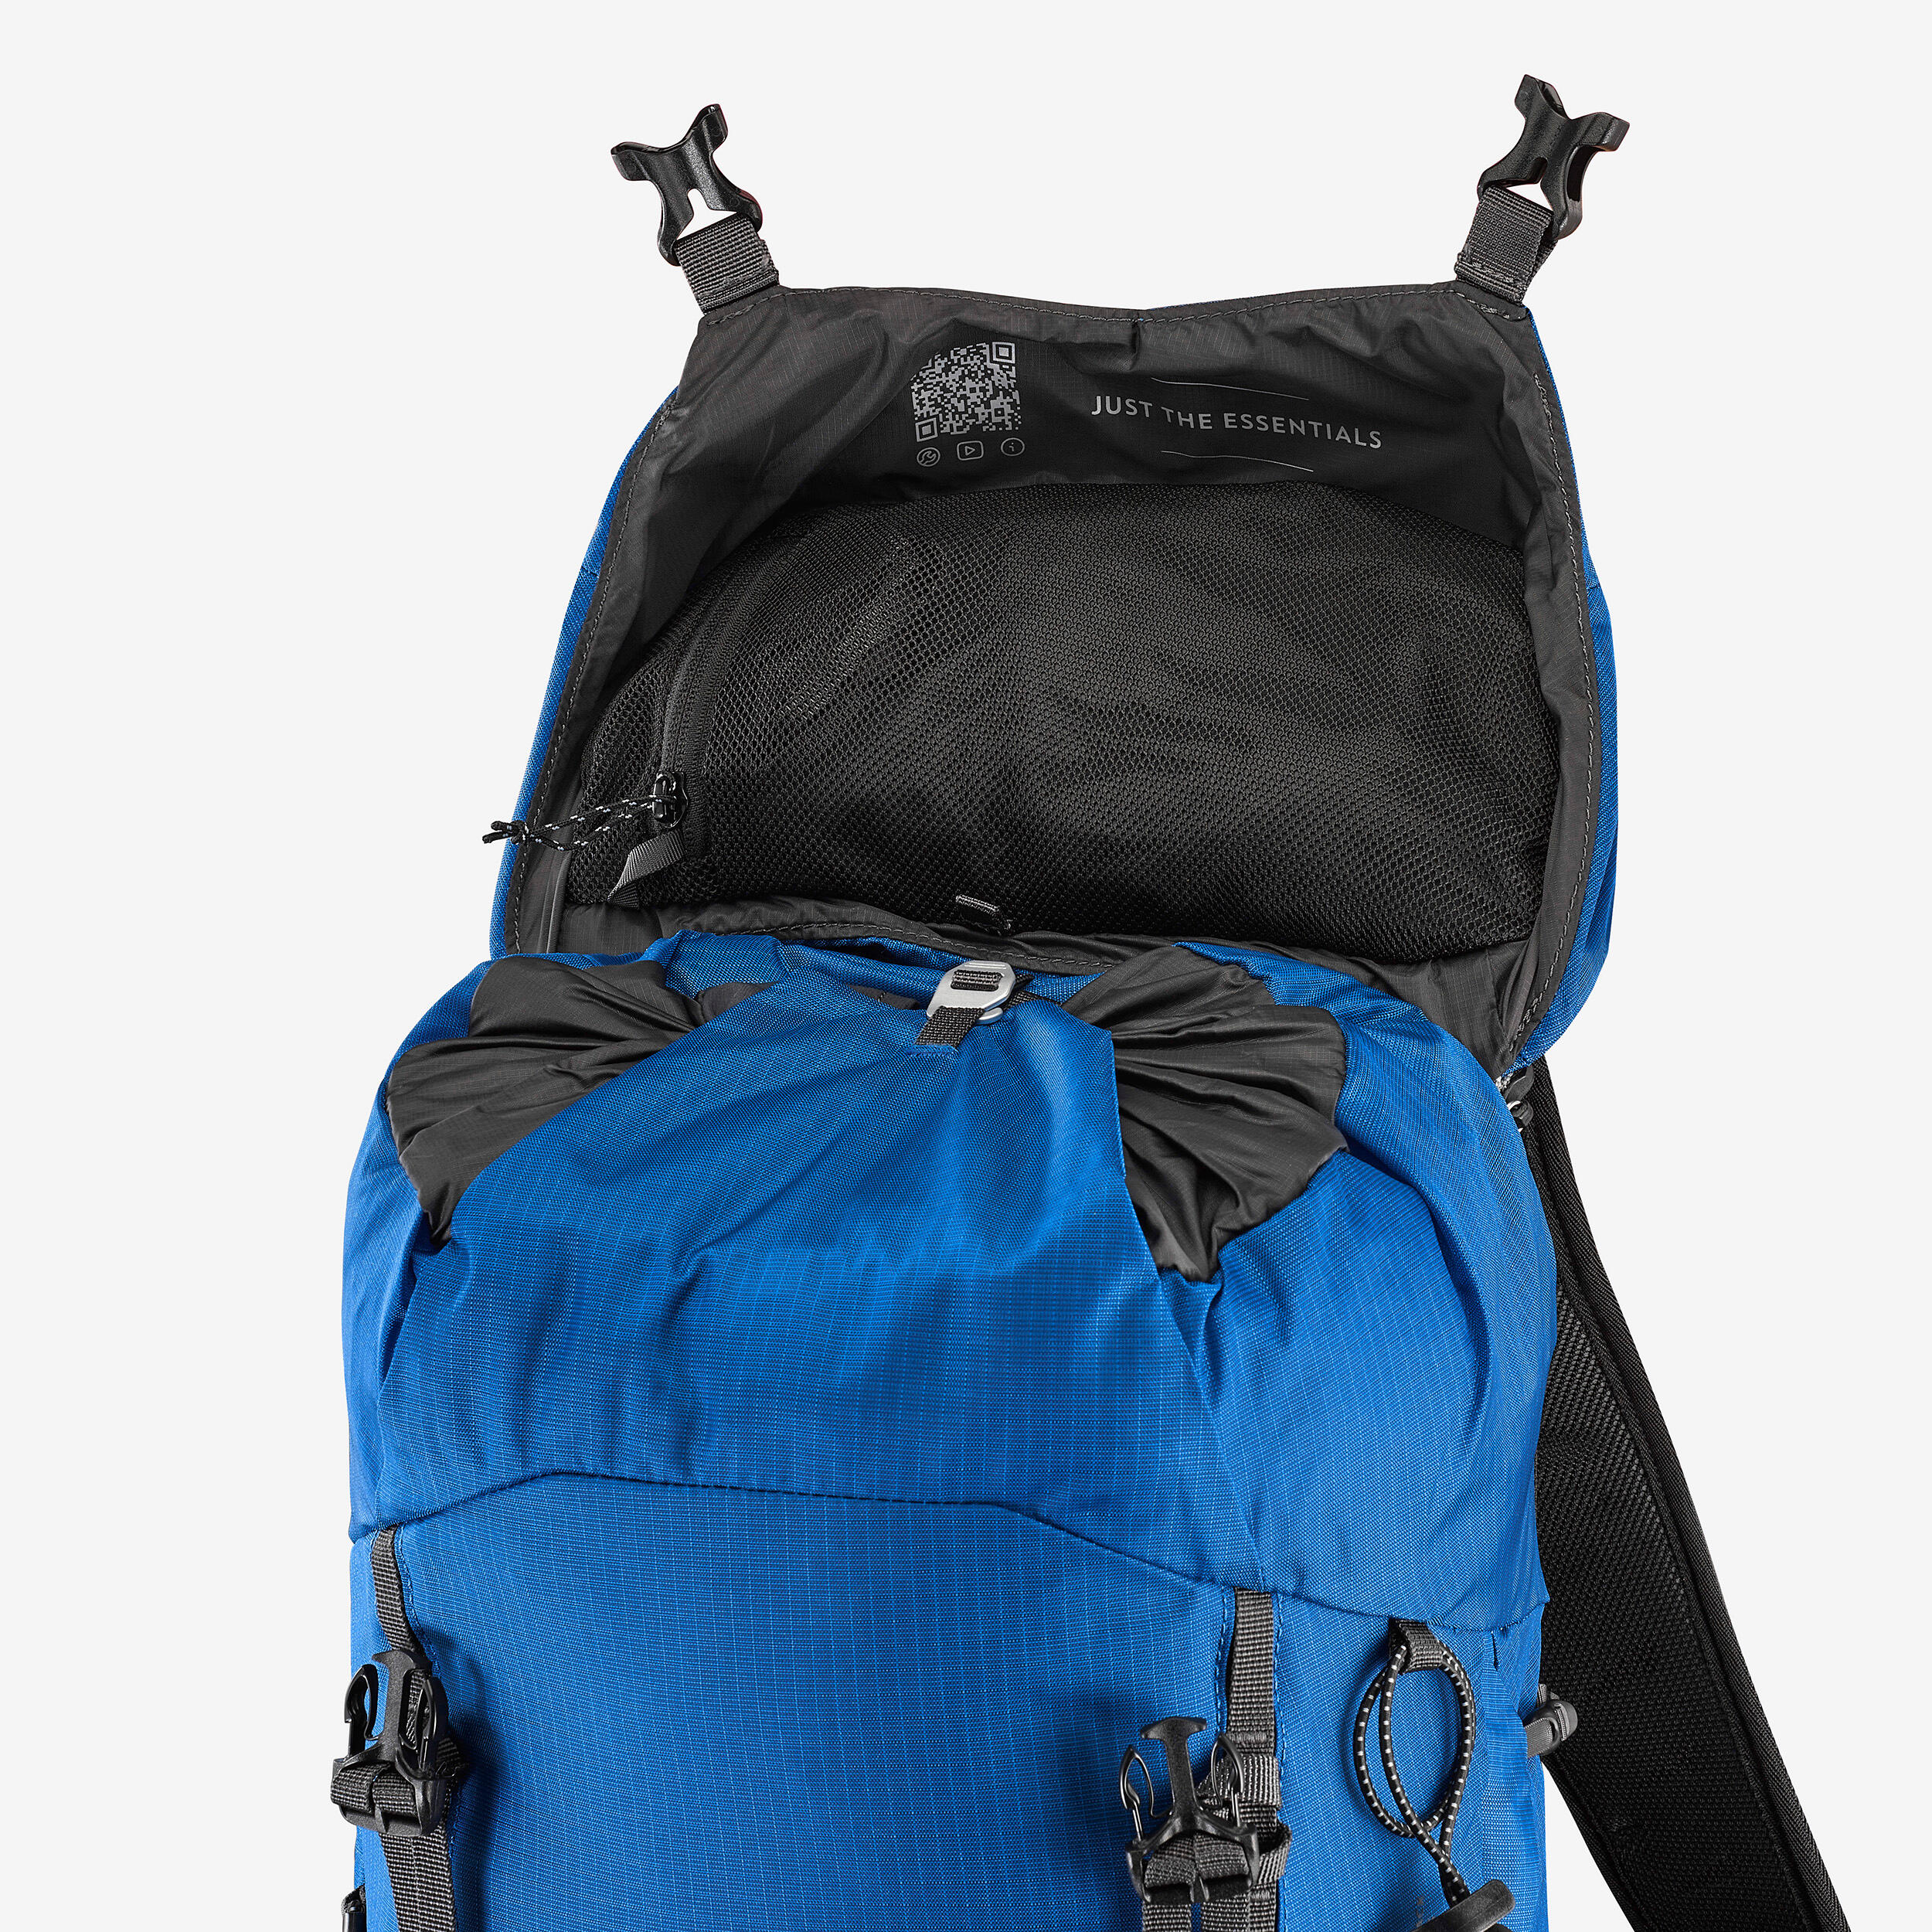 Mountain hiking backpack 25L - MH900 15/18